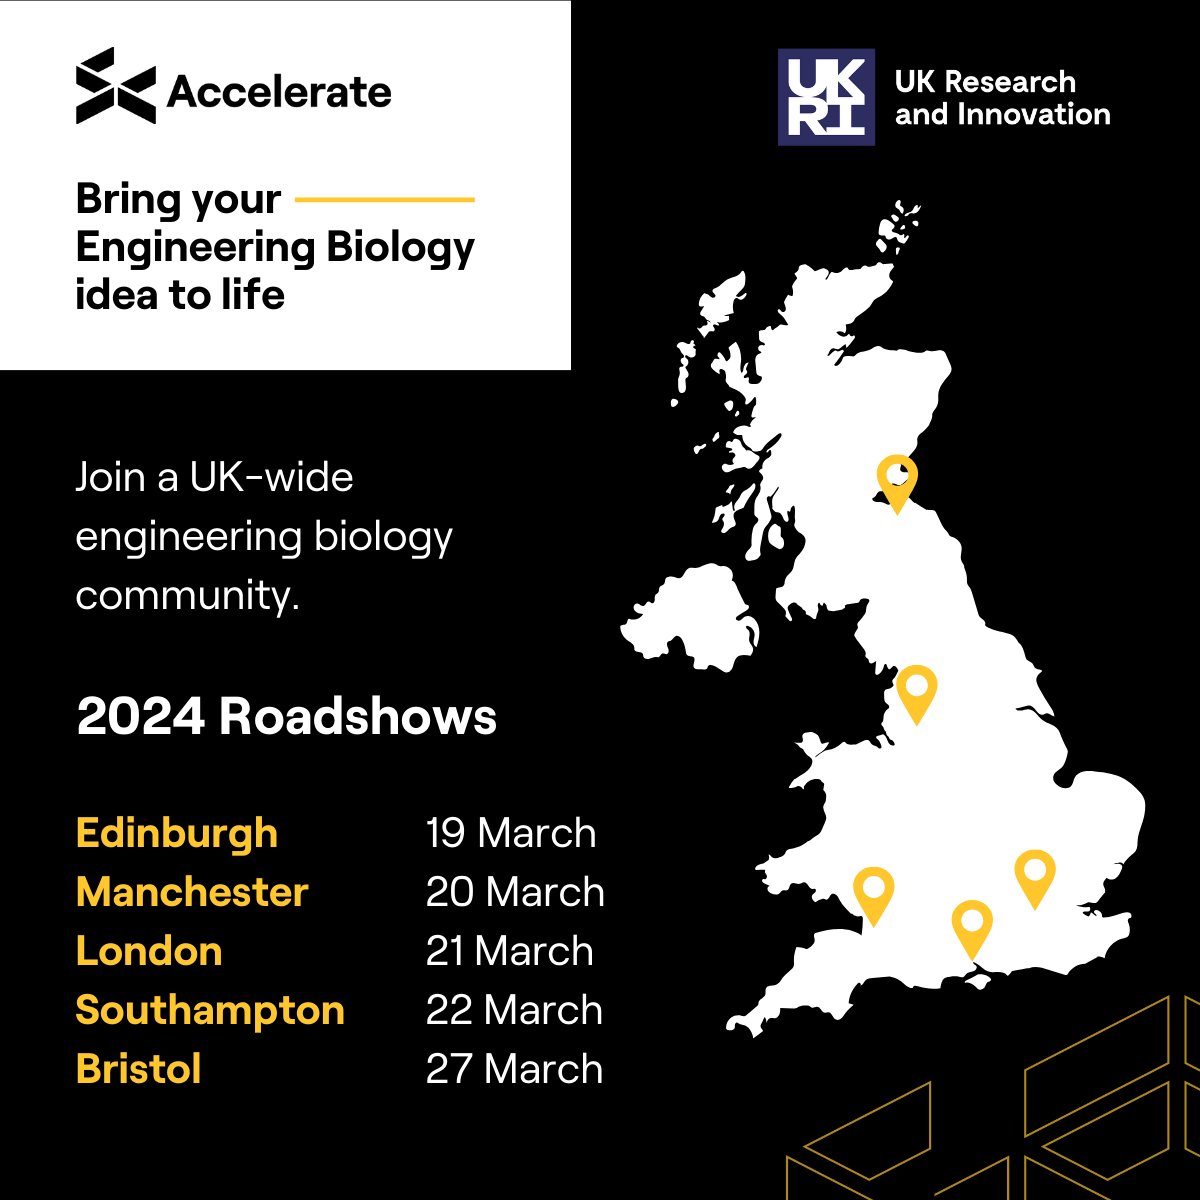 Our free EngBio roadshows start in 2 weeks! Join us in Edinburgh, Manchester, London, Southampton or Bristol if you want to hear more about our Accelerator or join a national network of engineering biologists. More info: accelerate.sciencecreates.co.uk #EngBio #startup #accelerator